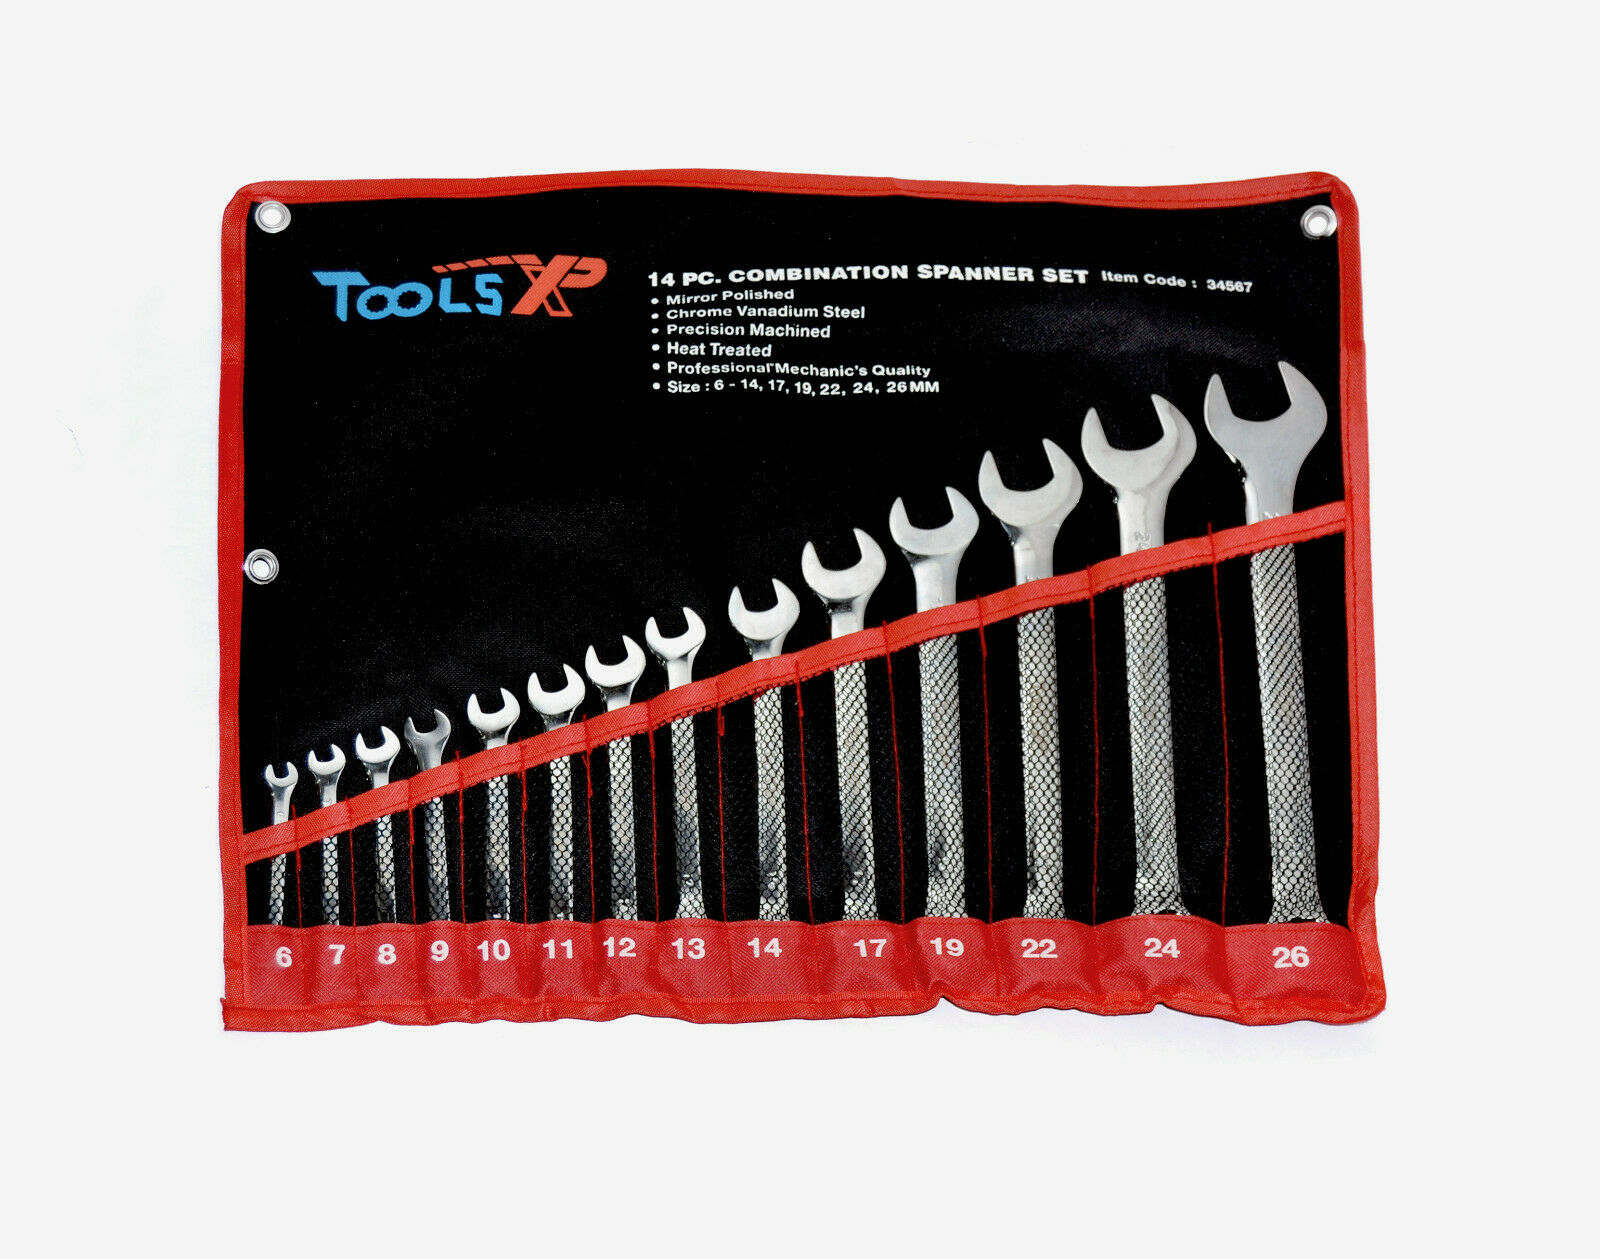 Tools XP 14 Piece Metric Combination Ring Spanner Wrench Set Tool Roll 6-26mm